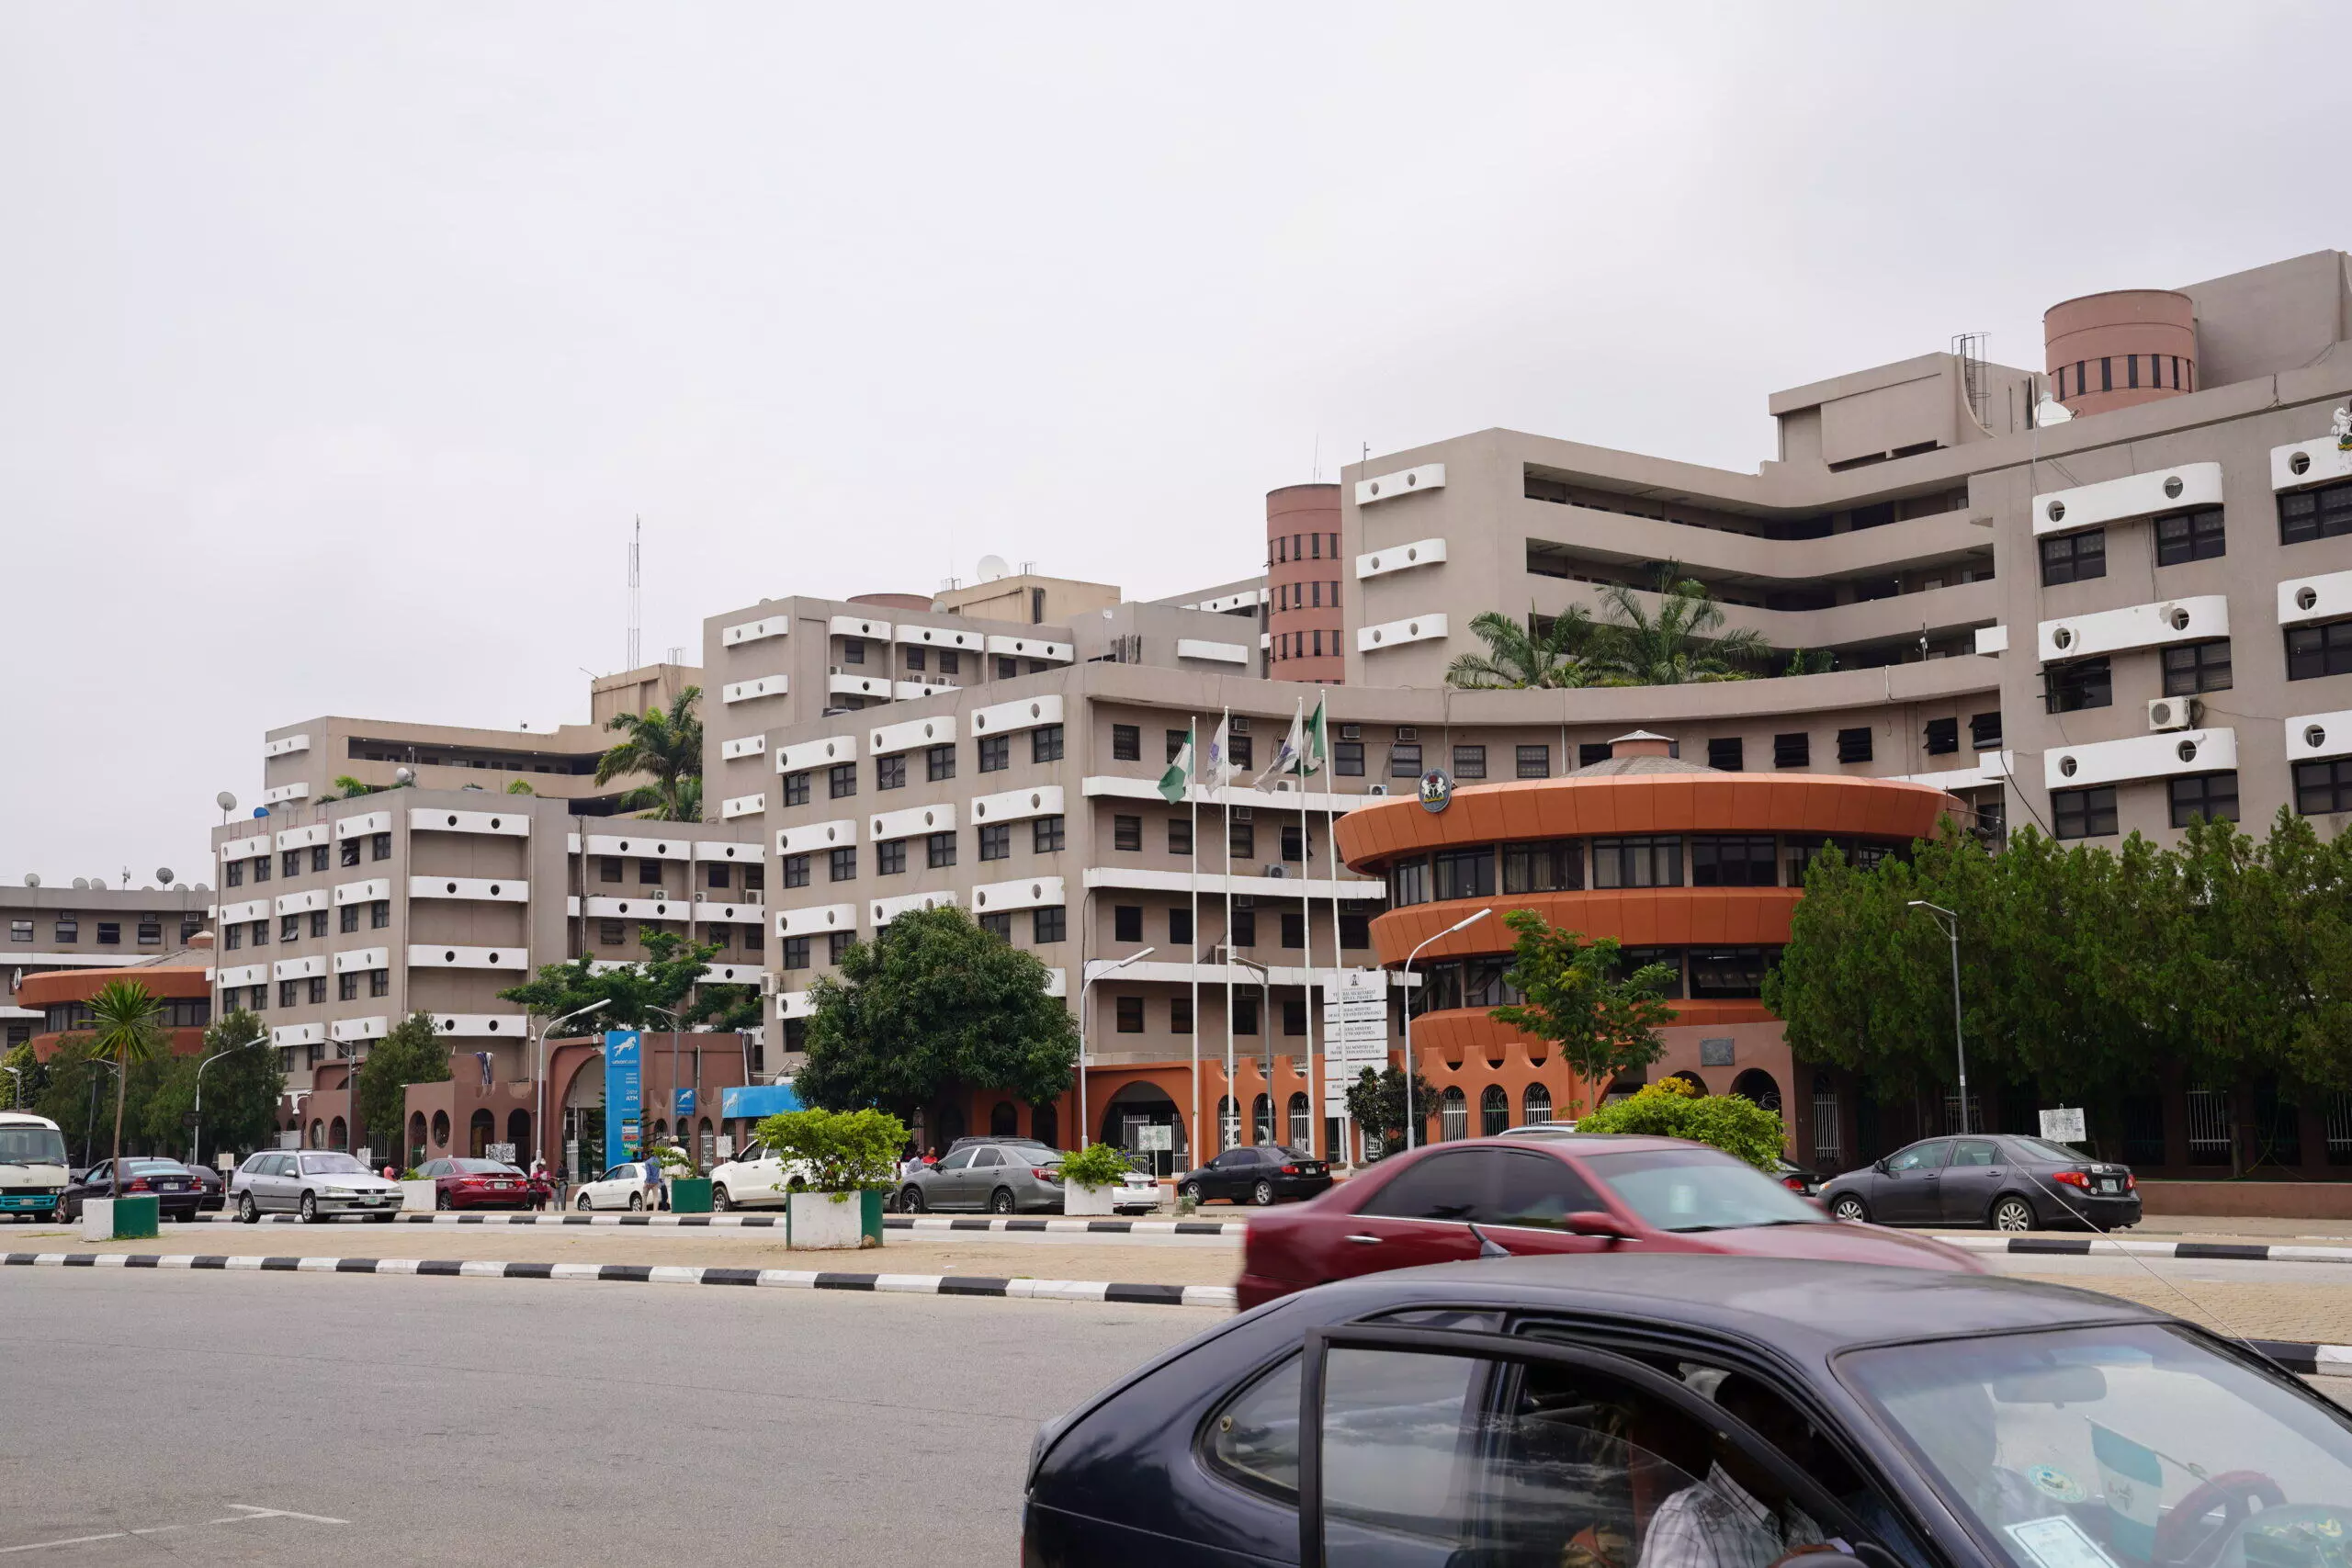 Civil servants resume work after Easter holidays in Abuja